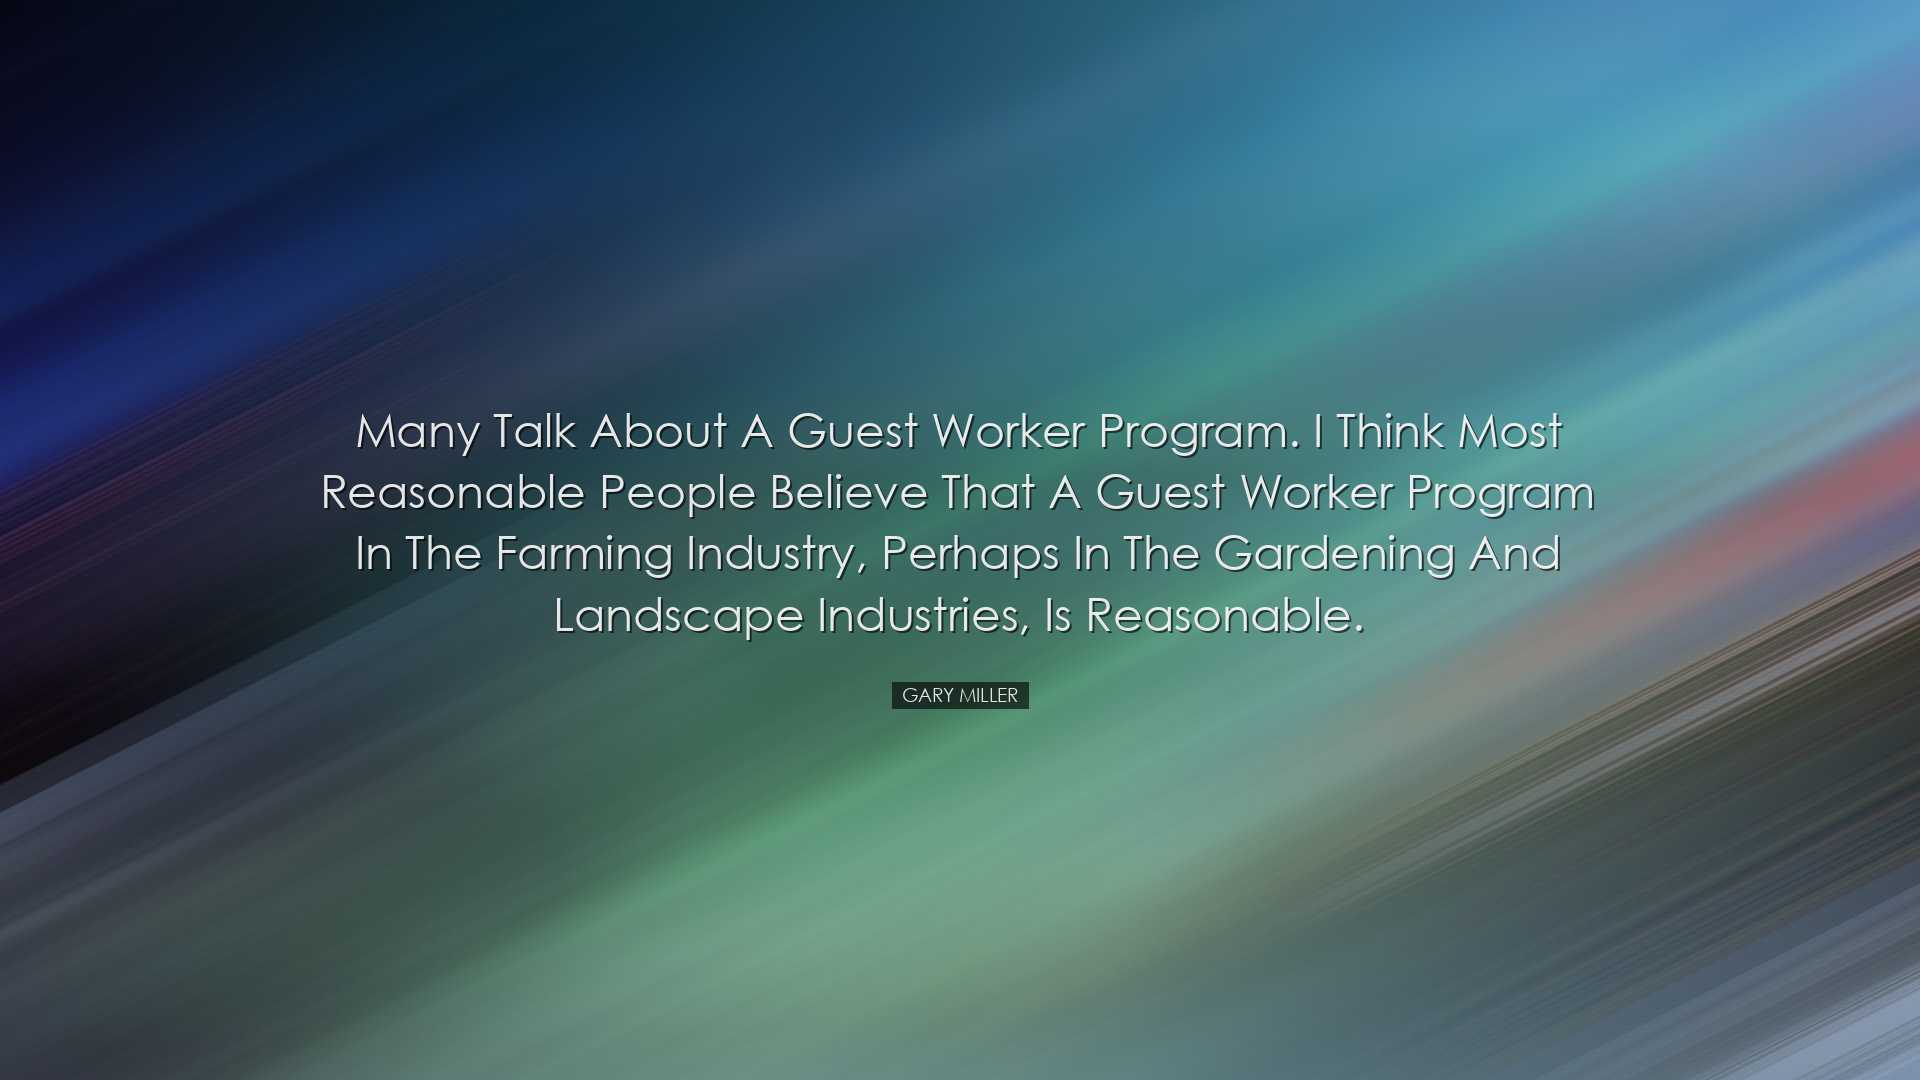 Many talk about a guest worker program. I think most reasonable pe